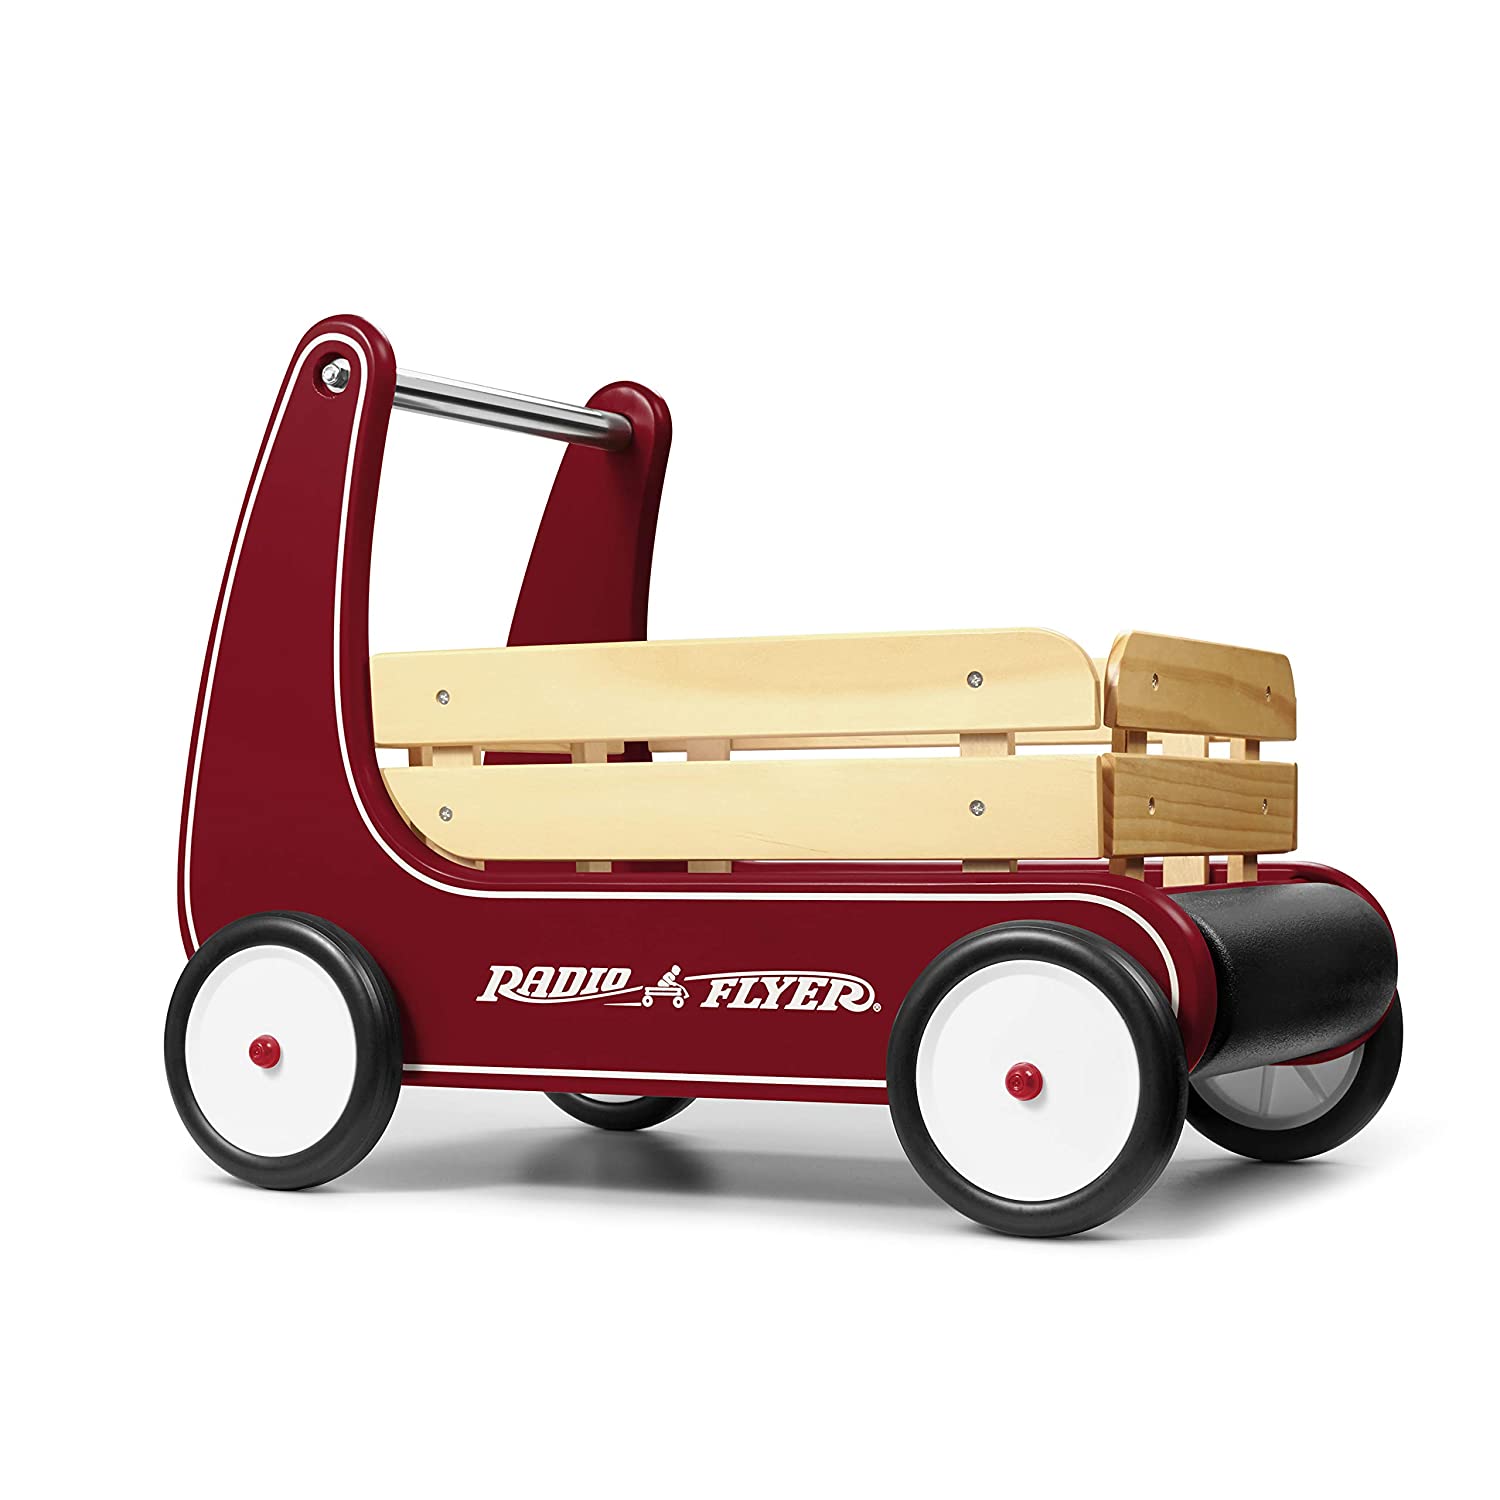 Top 10 Best Wagons for Kids Reviews in 2022 5